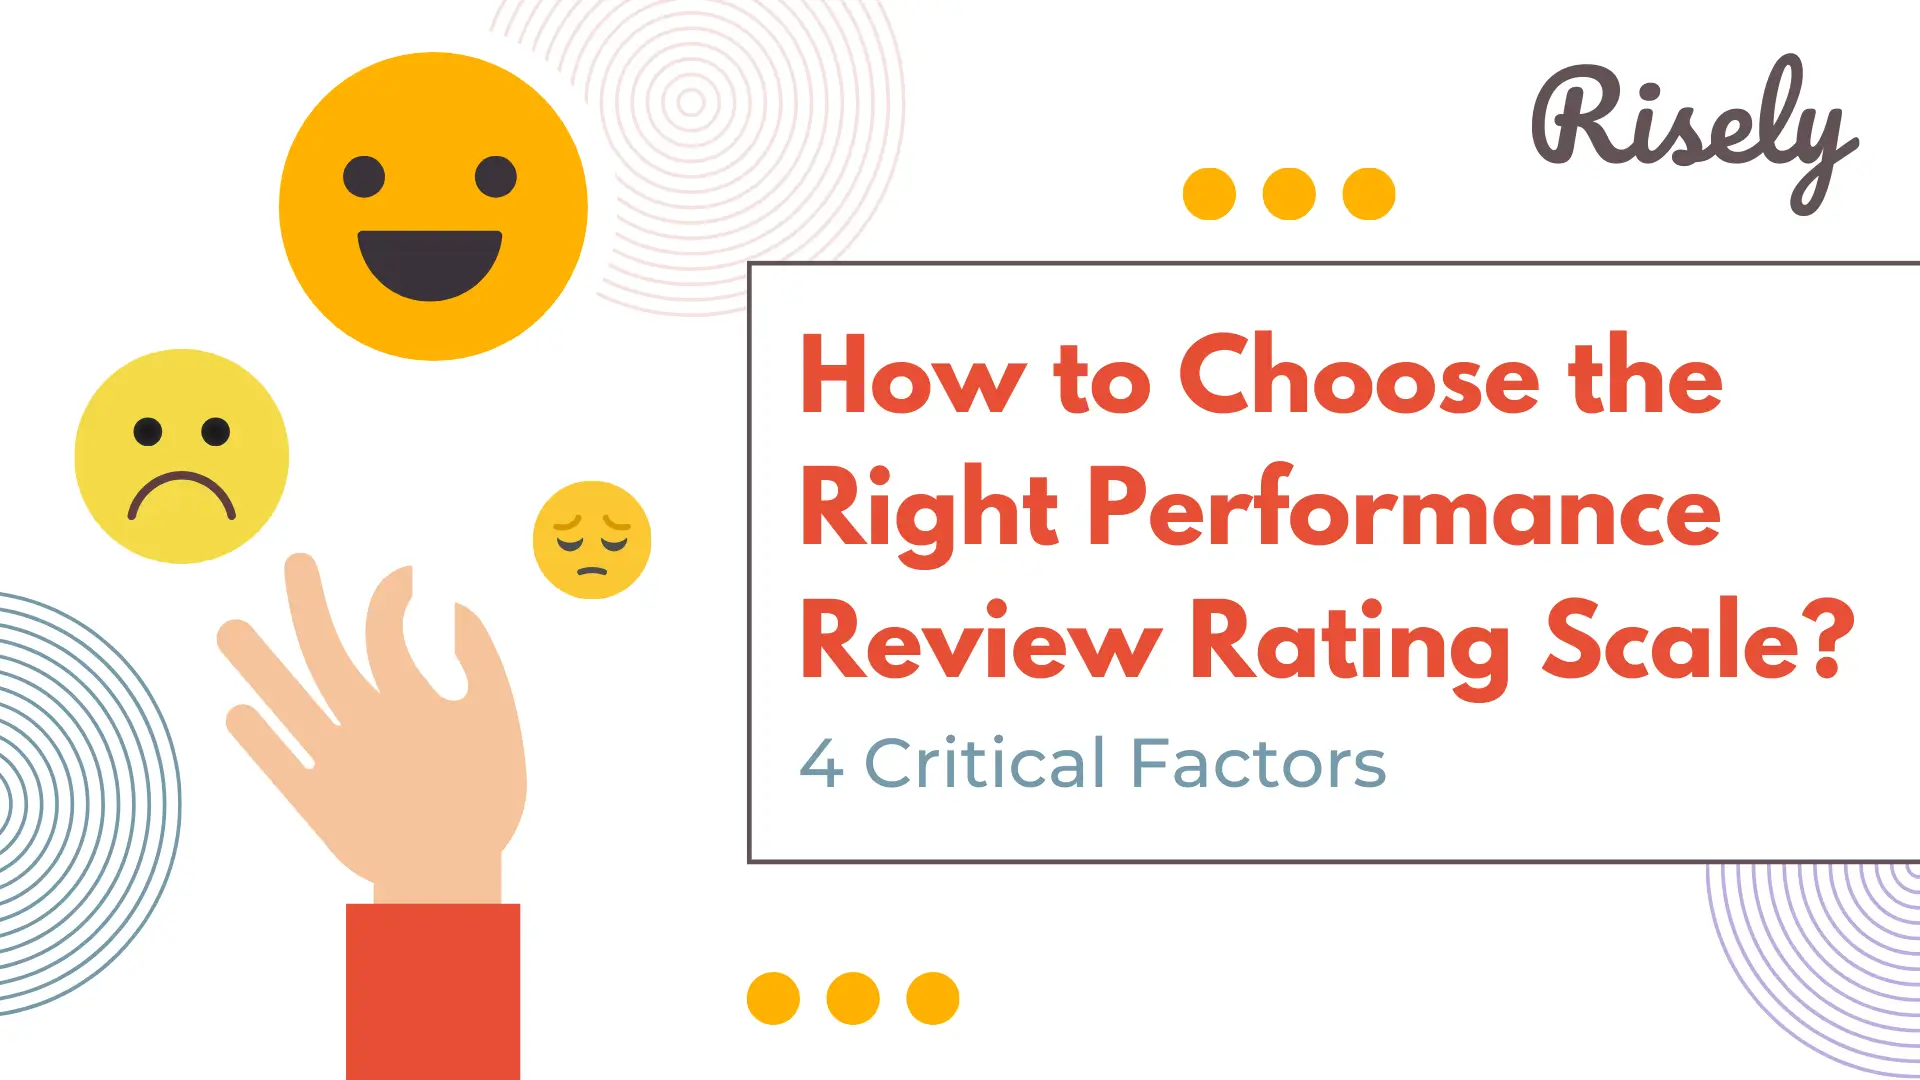 How to Choose the Right Performance Review Rating Scale? 4 Critical Factors